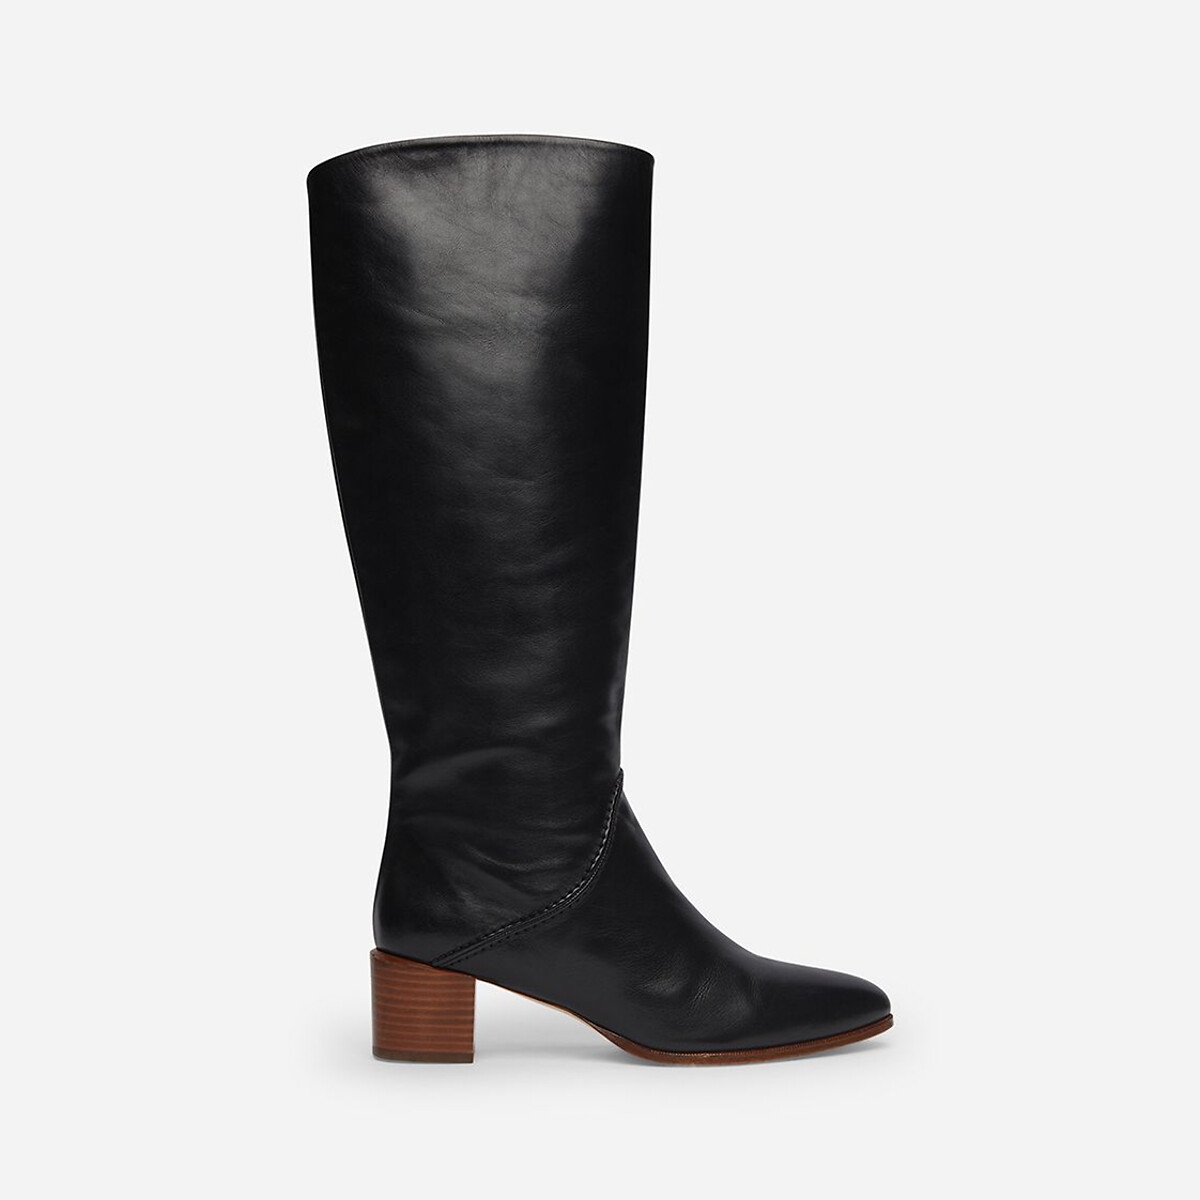 Vanessa Bruno Smooth Leather Calf Boots with Block Heel | Rather Saucy